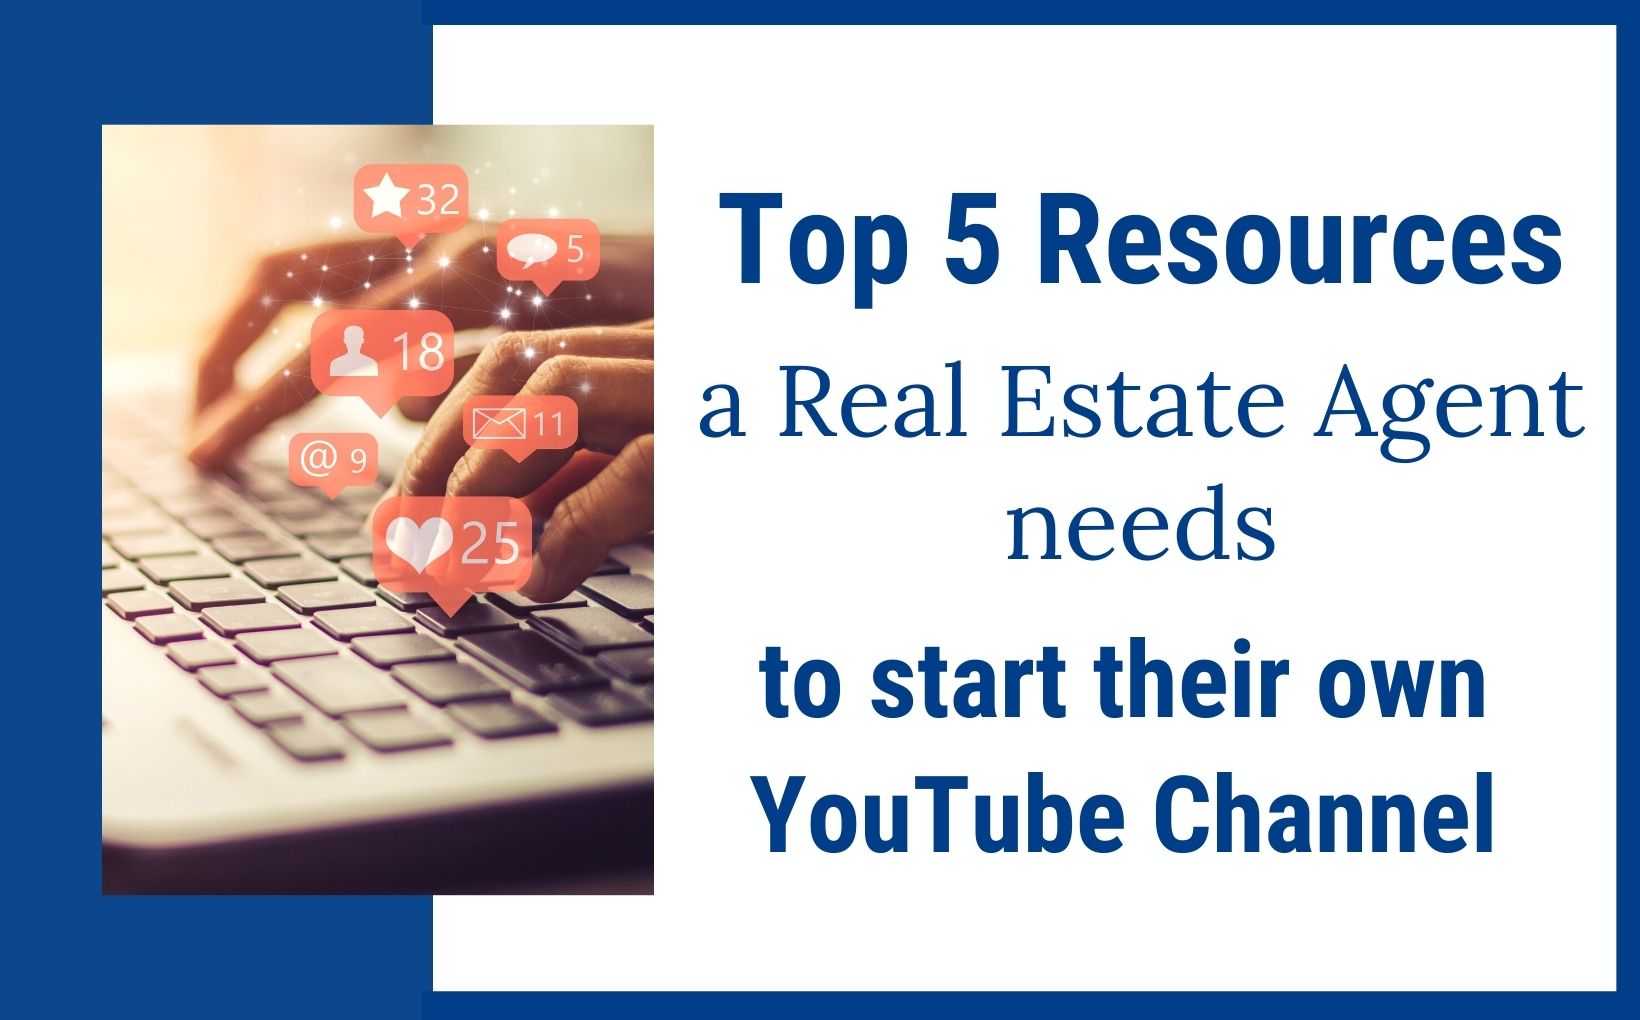 Top 5 Resources a Real Estate Agent needs to start their own YT channel, The YouTube Agents